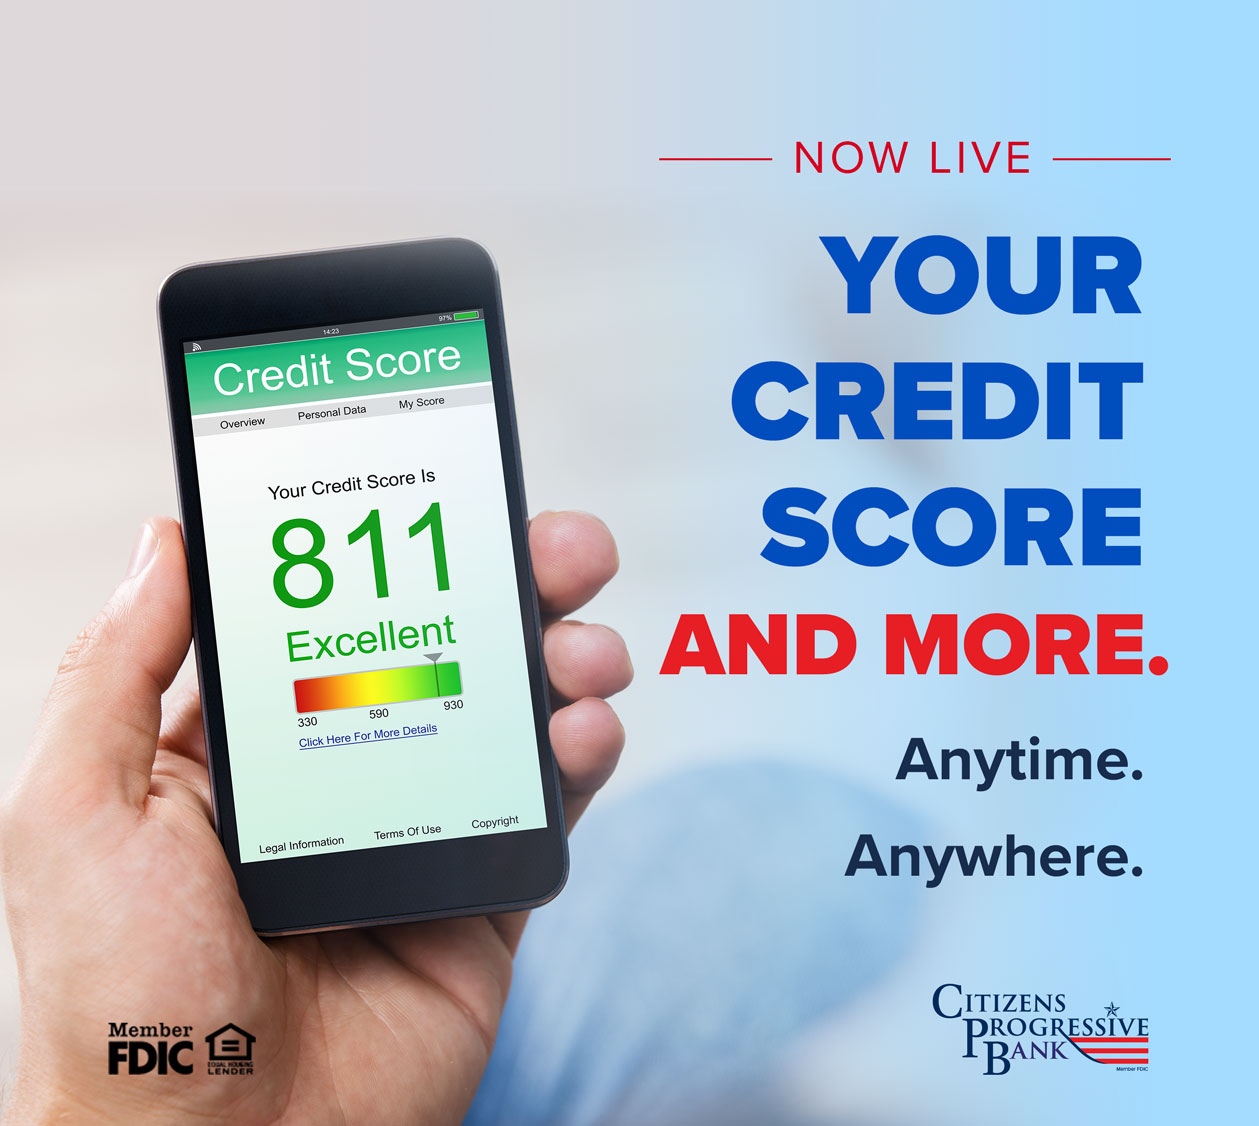 Now live - your credit score and more.